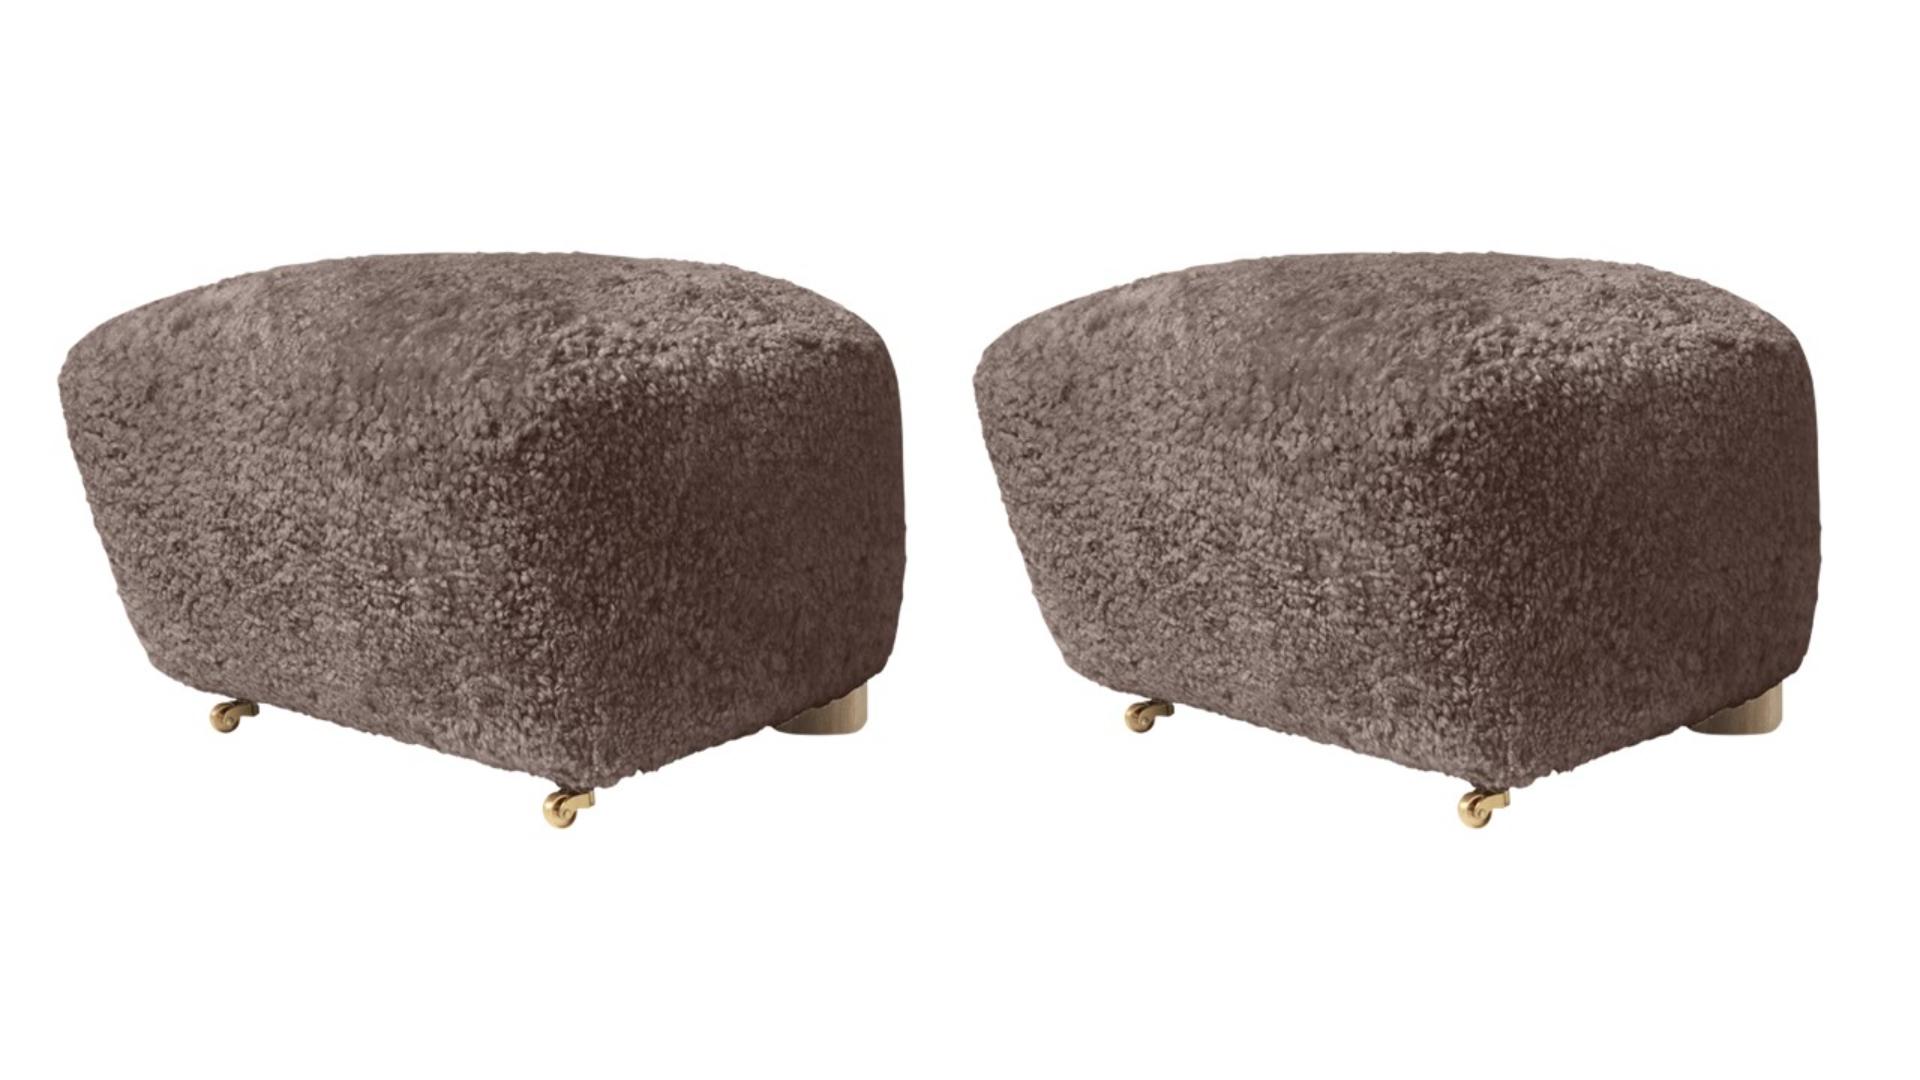 Set of 2 sahara natural oak sheepskin the tired man footstools by Lassen
Dimensions: W 55 x D 53 x H 36 cm 
Materials: Sheepskin

Flemming Lassen designed the overstuffed easy chair, The Tired Man, for The Copenhagen Cabinetmakers’ Guild